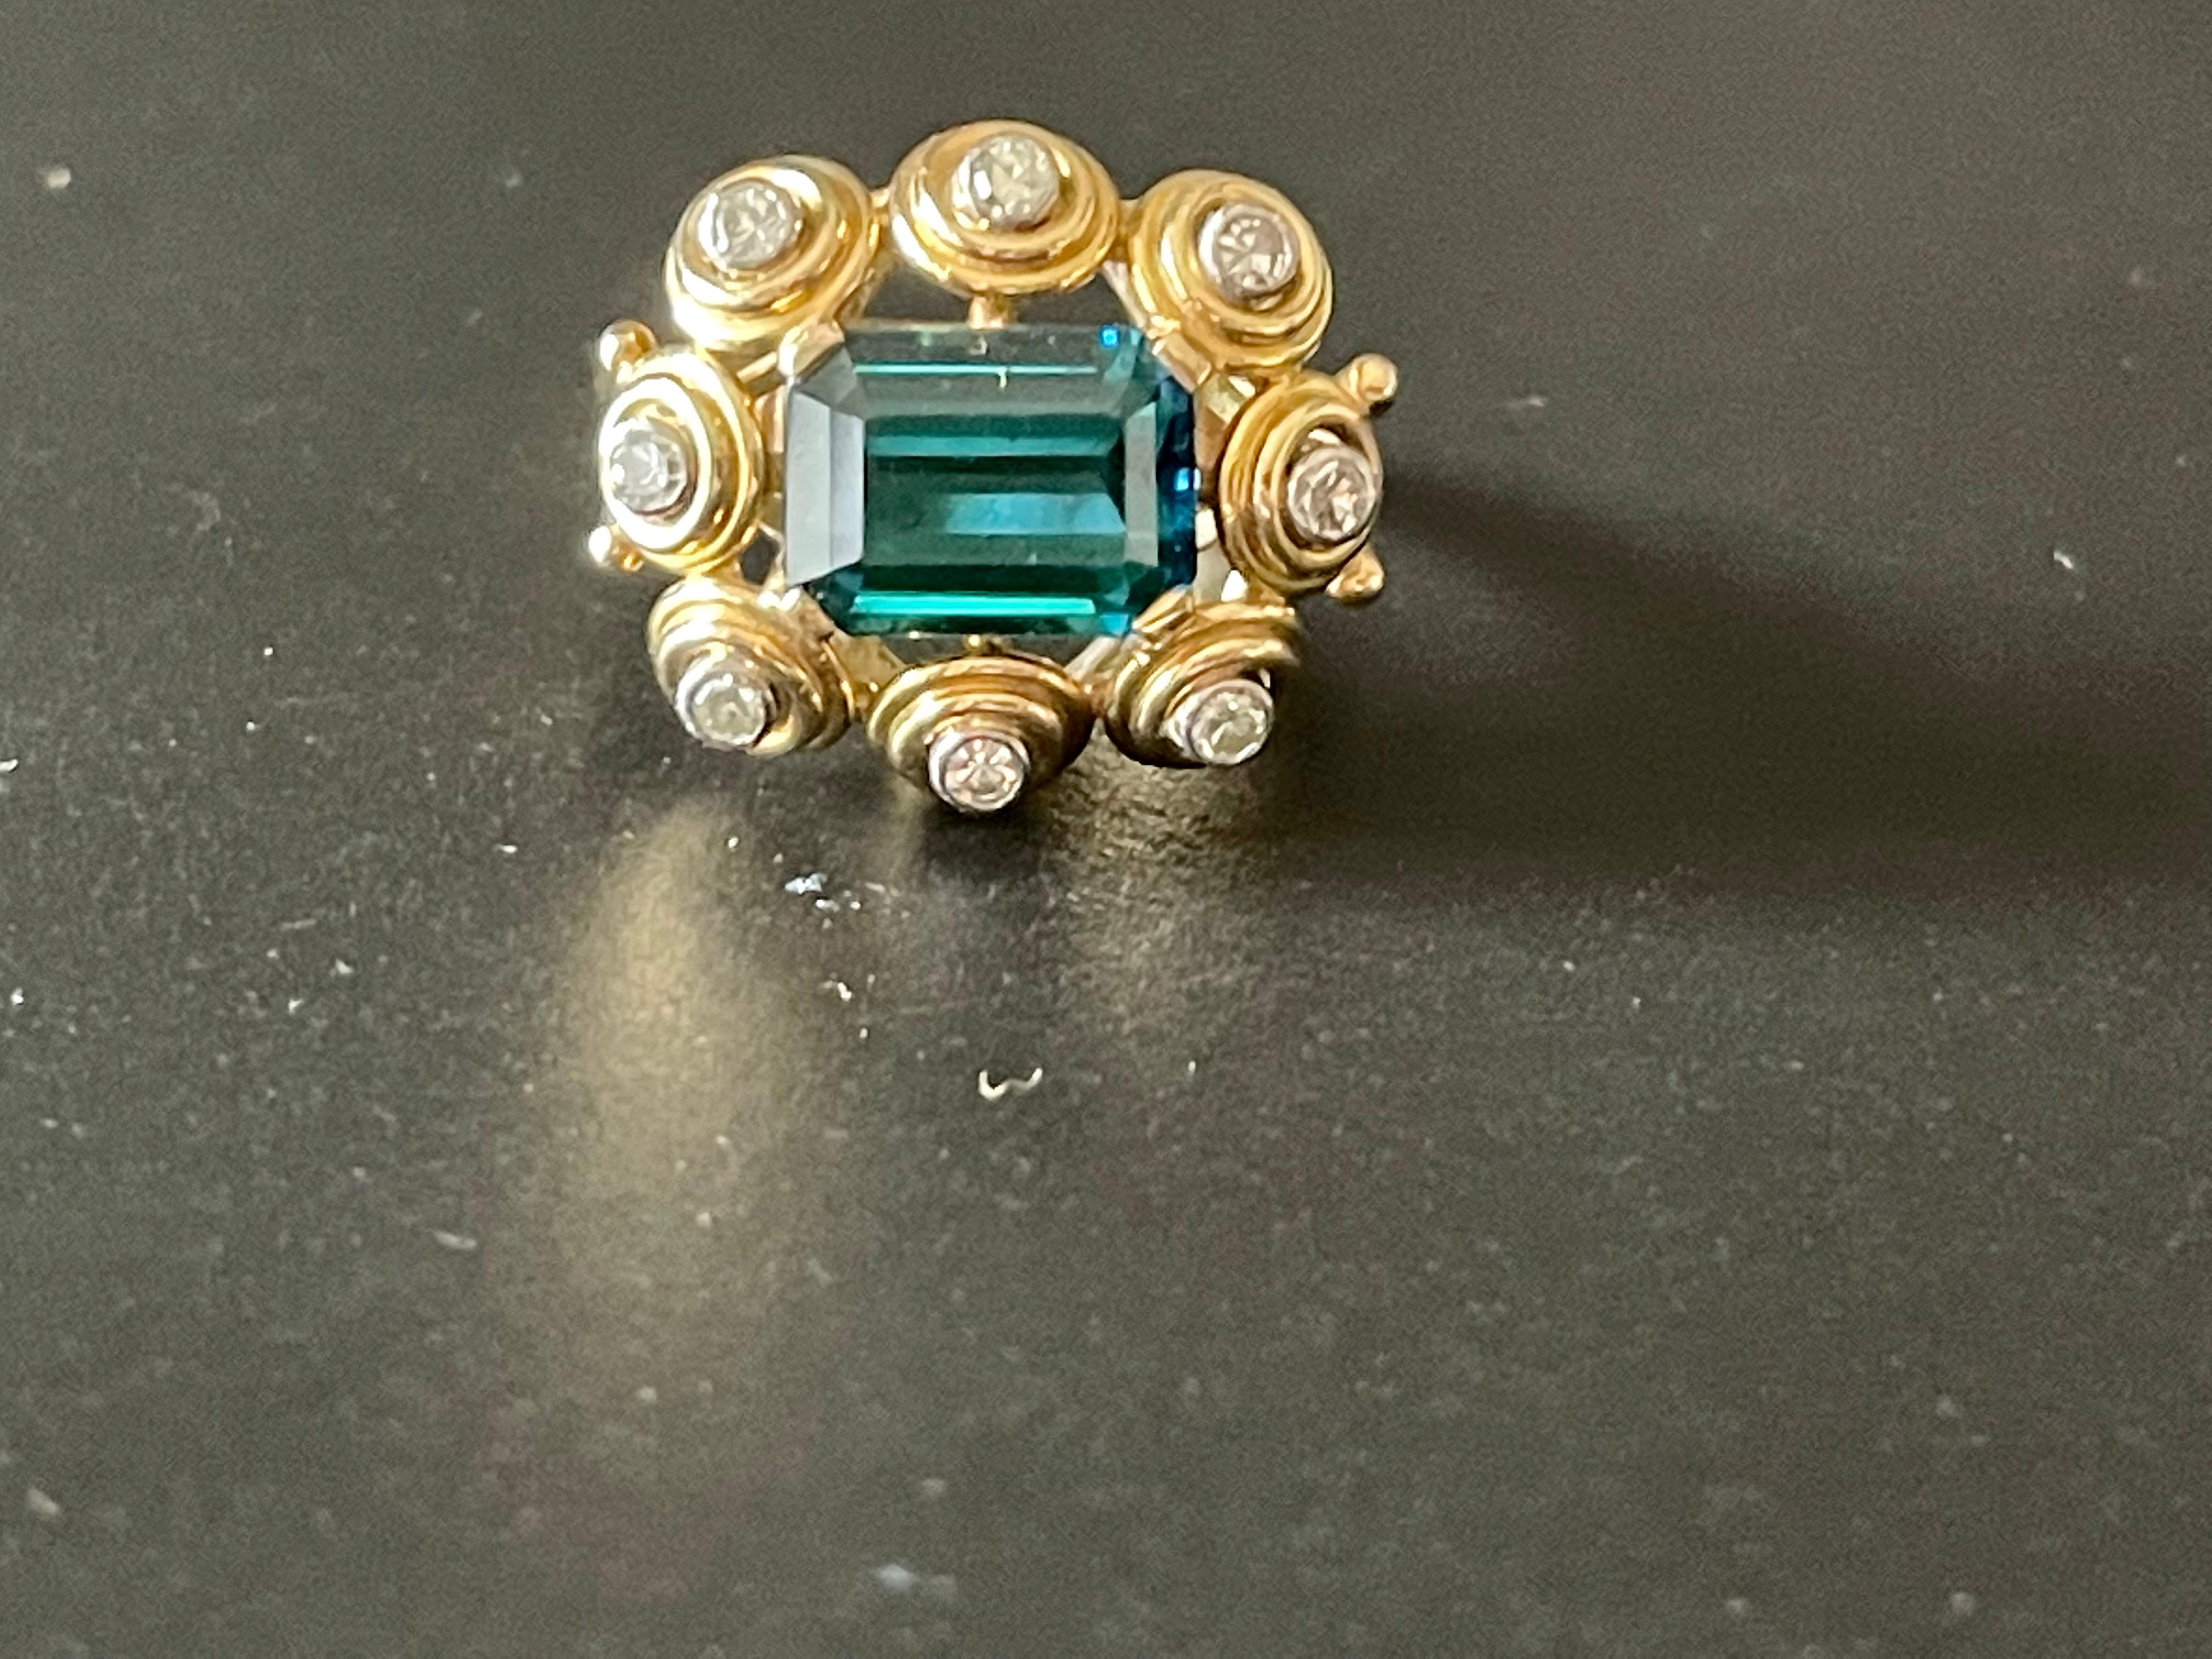 Beautiful 18 K yellow Gold Ring featuring a emearld cut Indicolite Tourmaline weighing approximately 3.50 ct surrounded by 8 brillinat cut Diamonds weighing approximately 0.50 ct. 
The ring is currently size 53/13 ( american ring size 6.50) but can